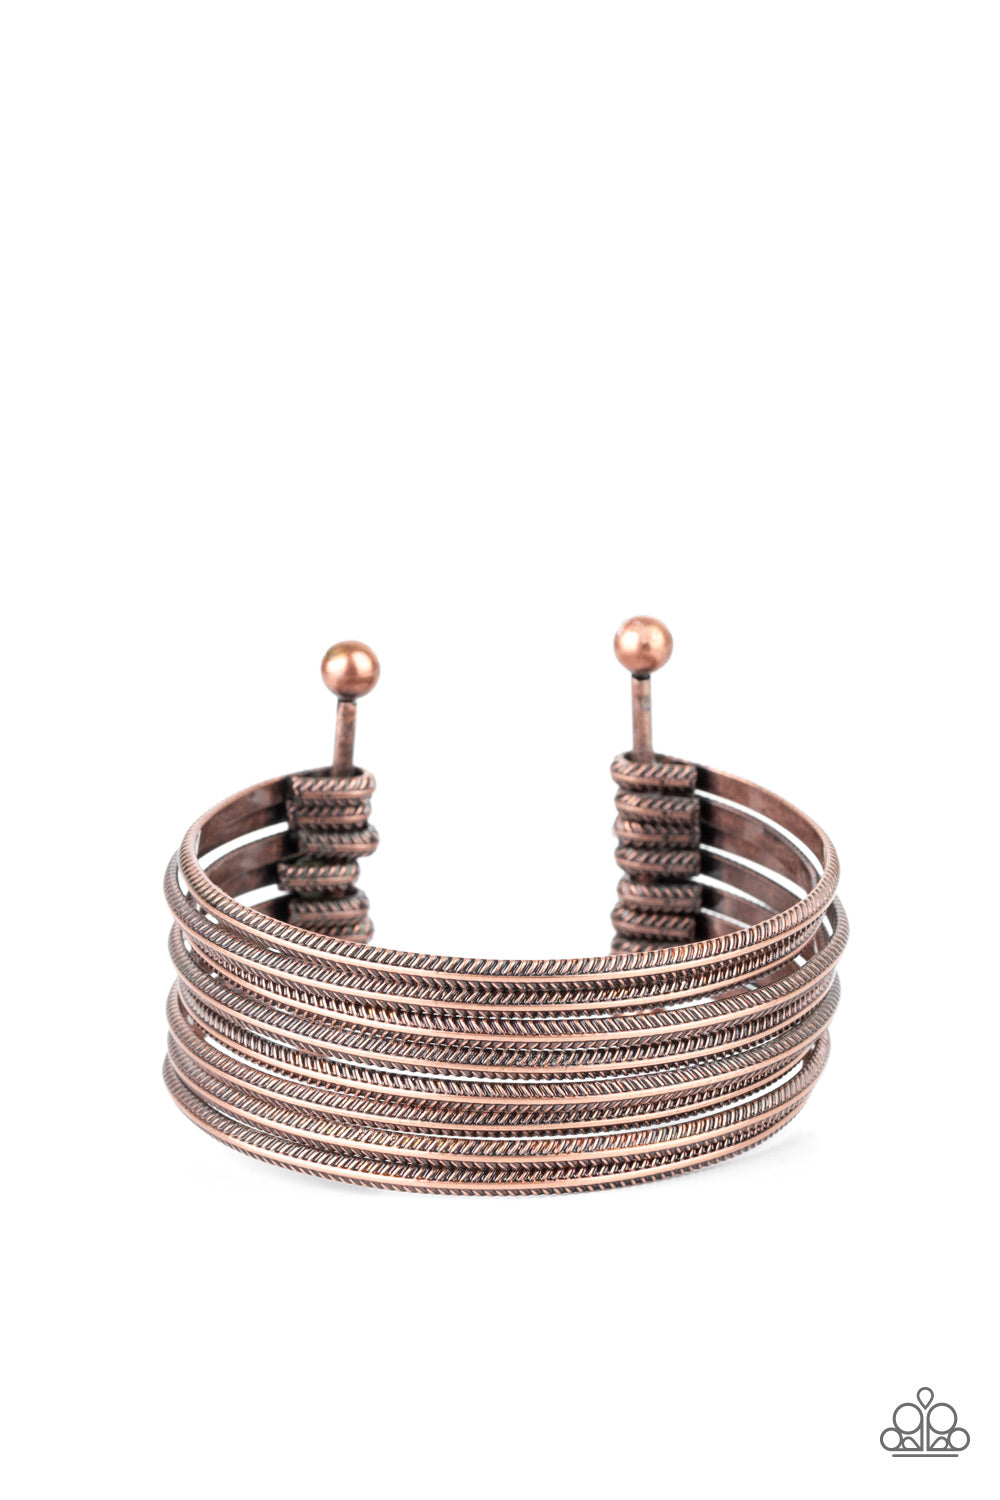 Now Watch Me Stack - Copper - Bella Bling by Natalie